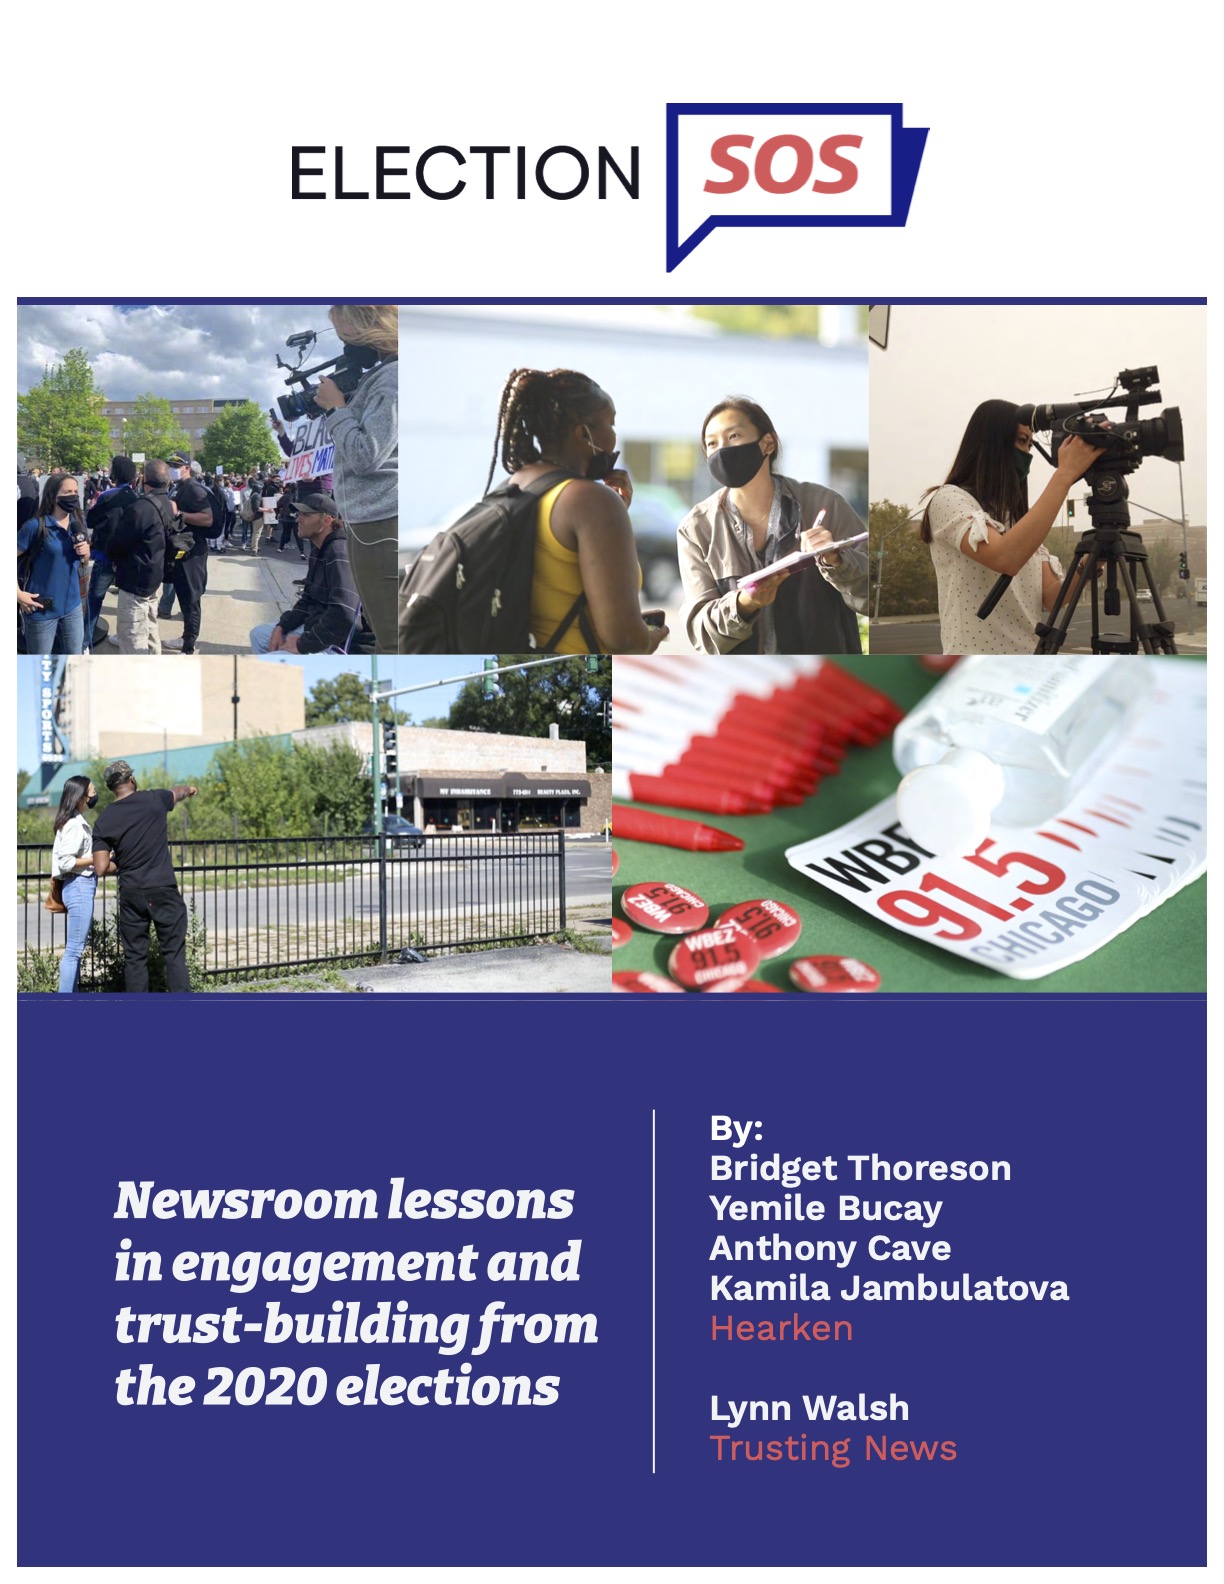 Election SOS Lessons Learned Report